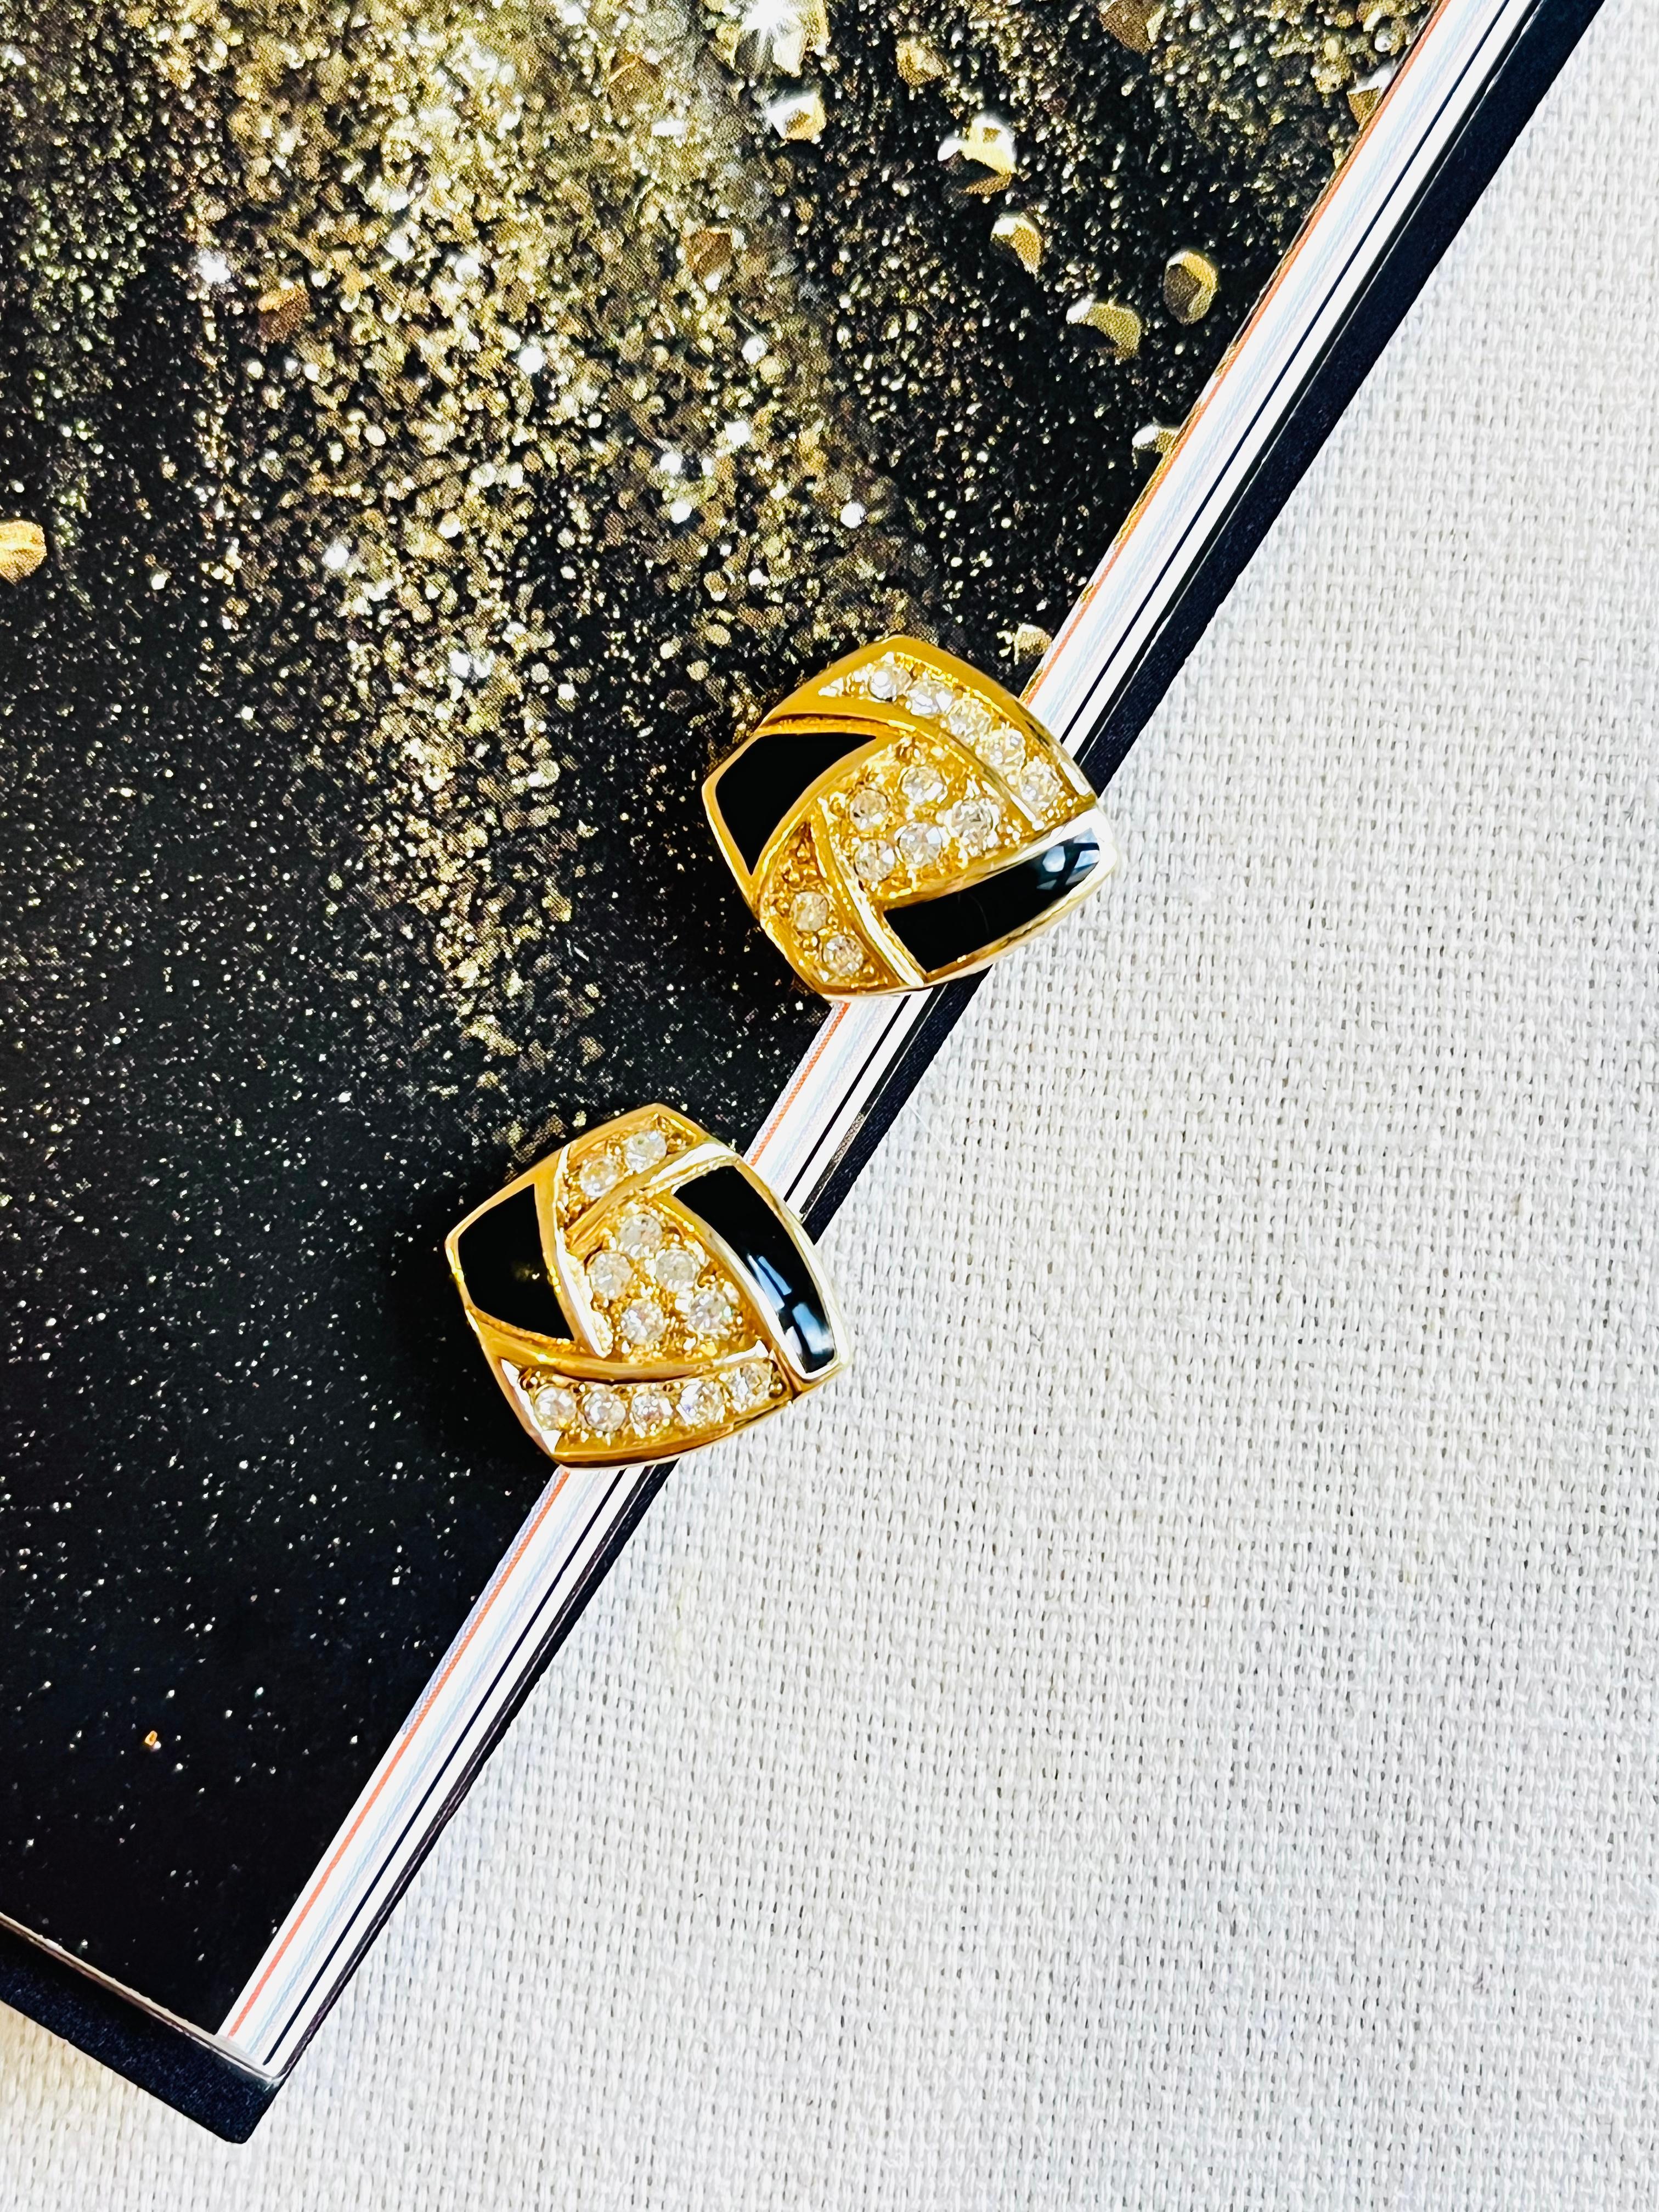 Renowned for its timeless elegant designs, Christian Dior presents this earrings. Crafted from polished gold plated brass, the piece is adorned with dazzling Swarovski crystal embellishments and finished with black enamel detailing. Signed at the